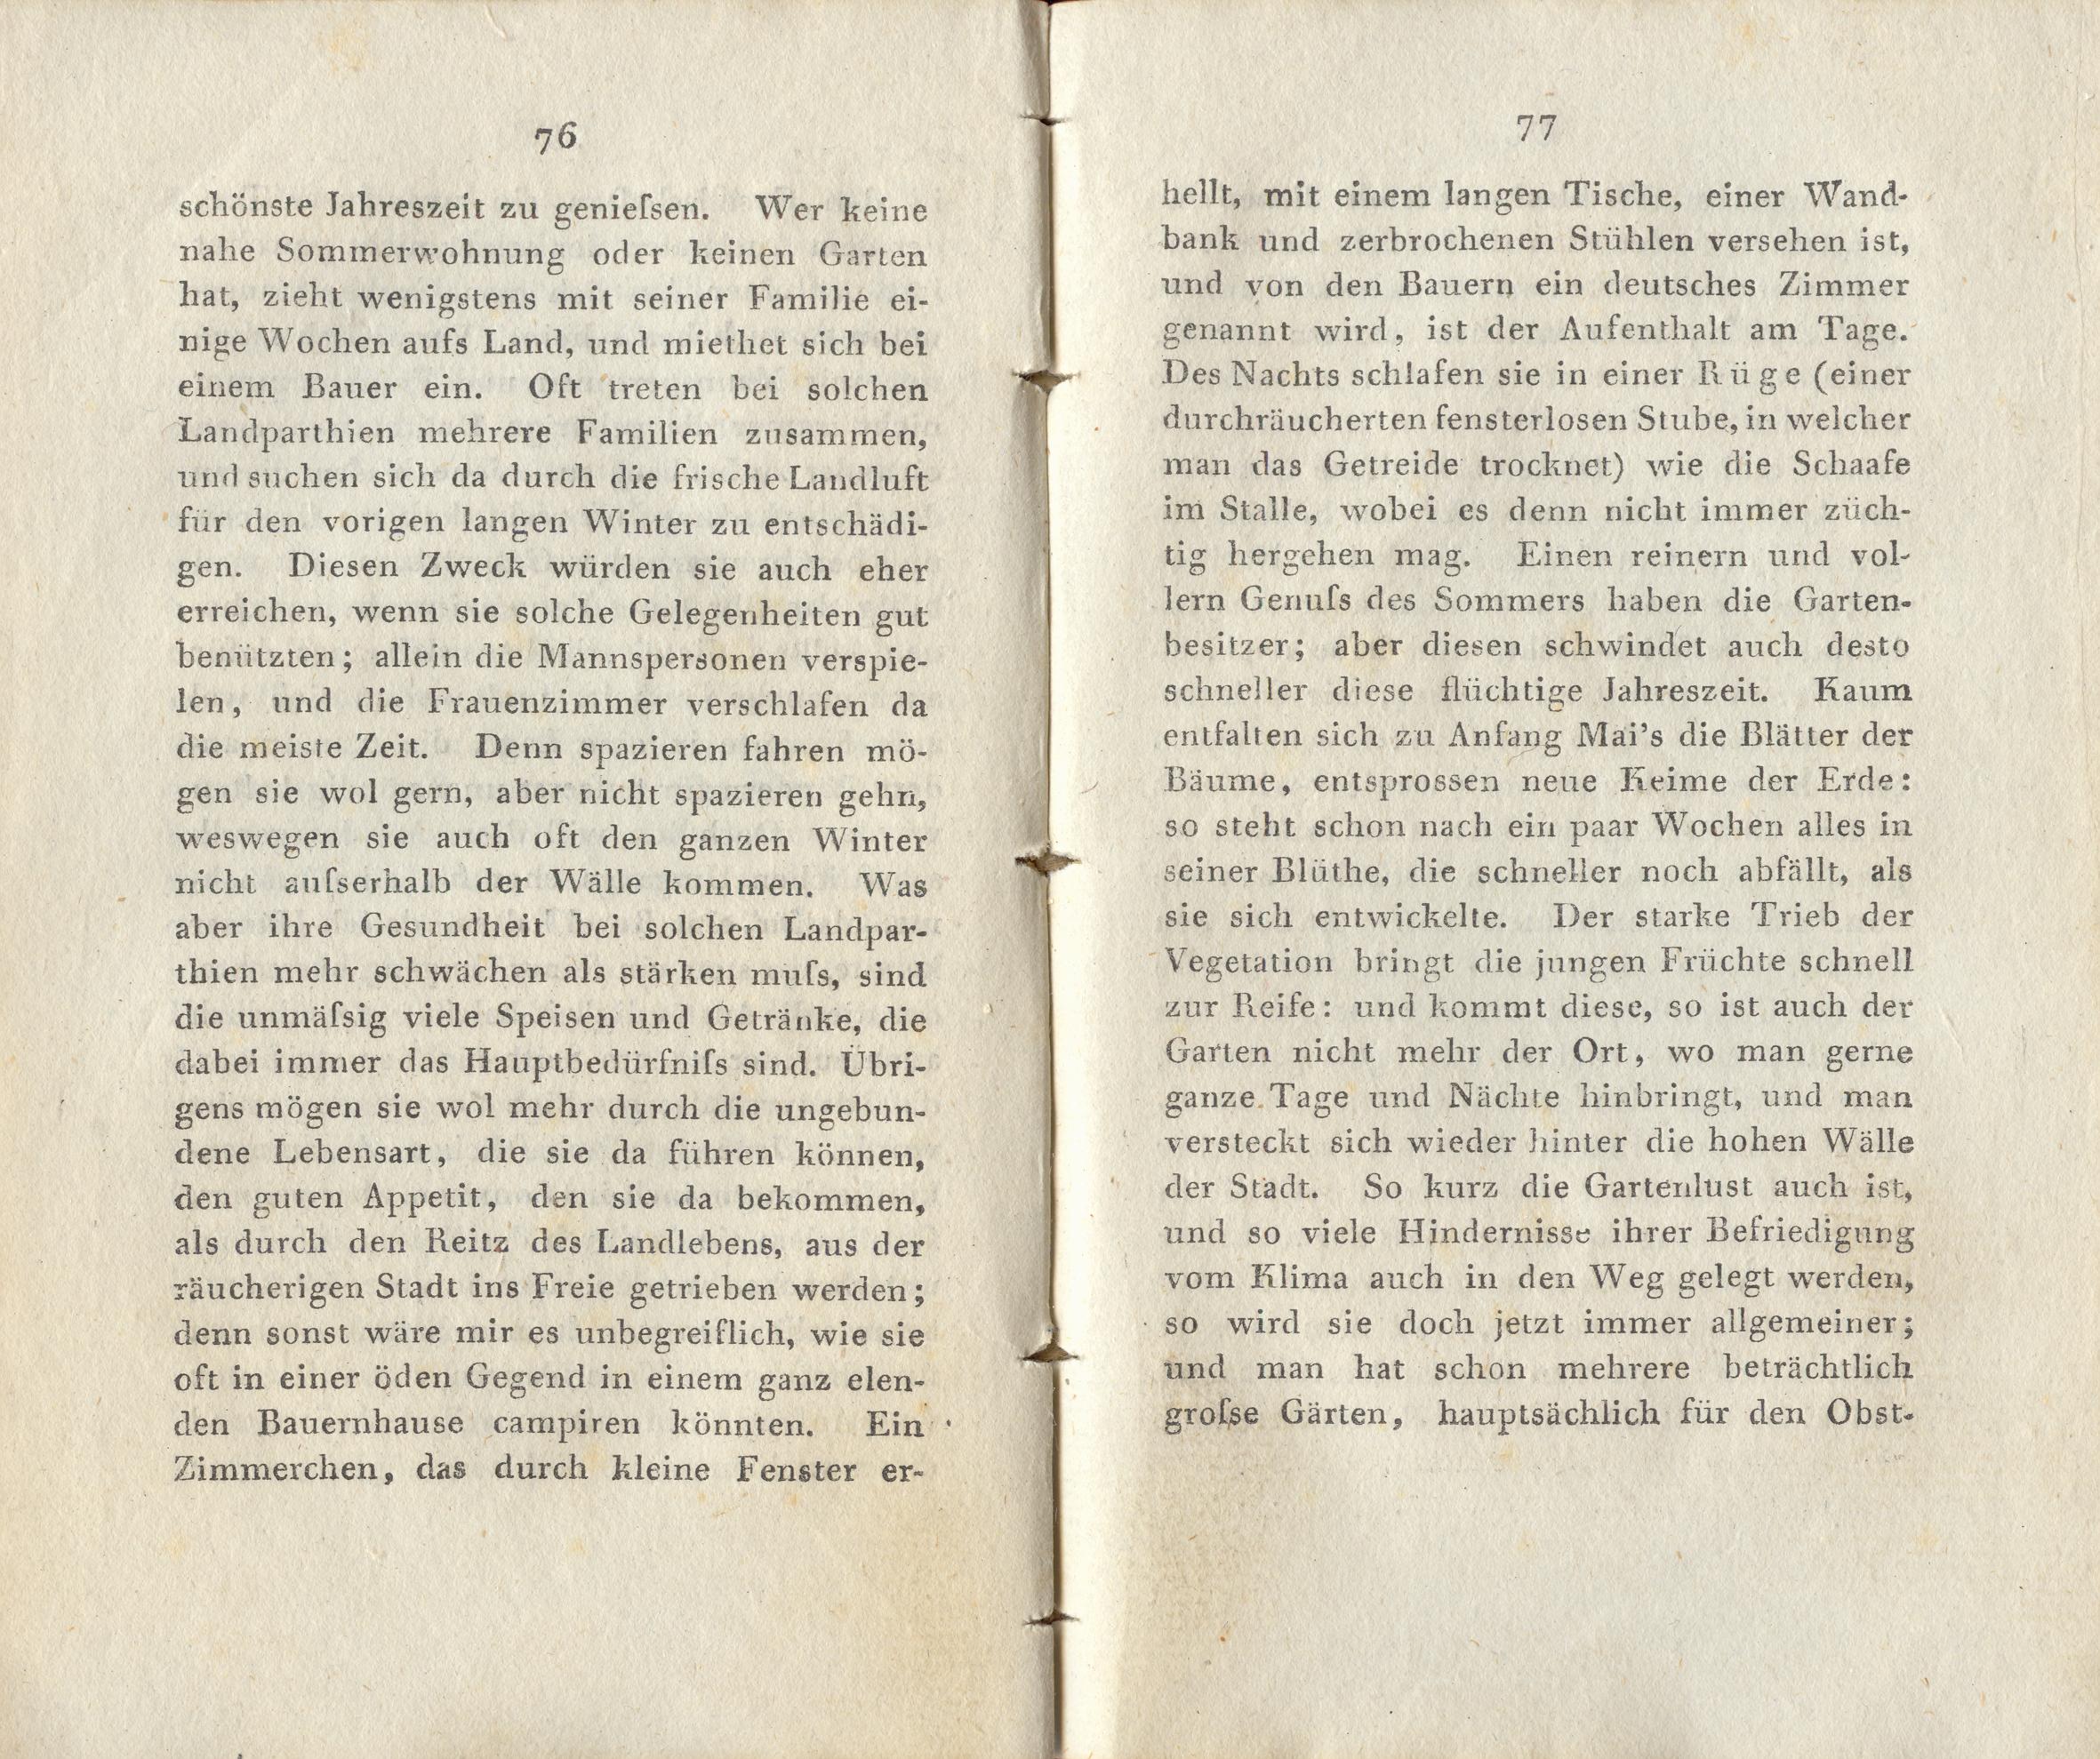 Briefe über Reval (1800) | 39. (76-77) Main body of text